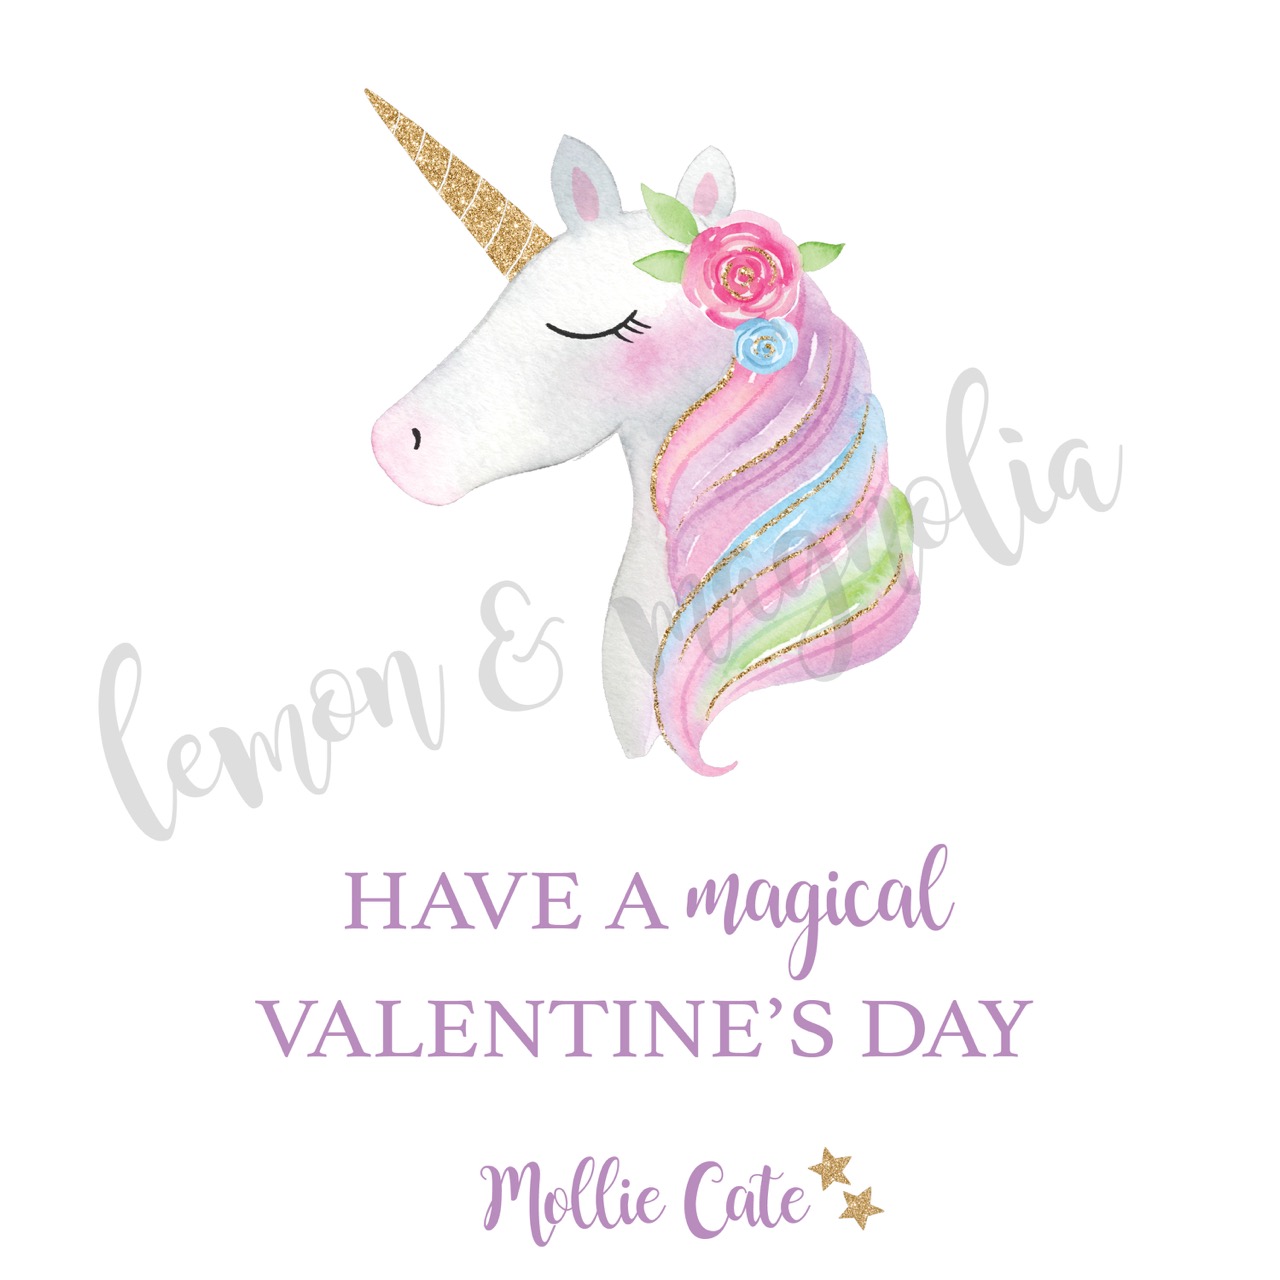 Personalized Watercolor Unicorn Valentine's Day Gift Tags